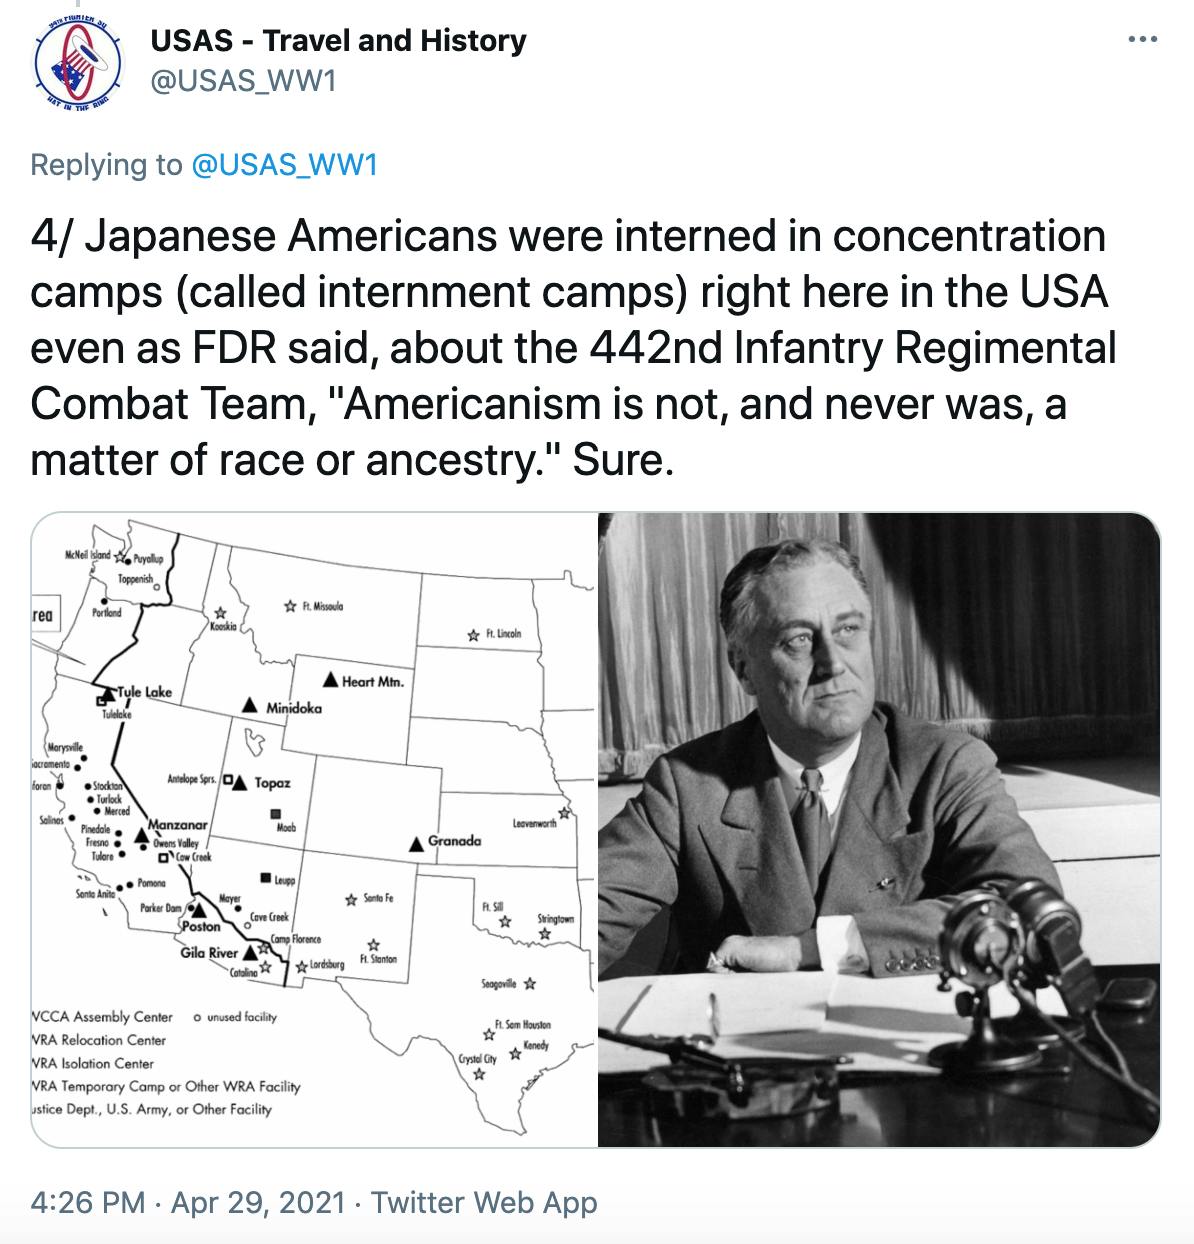 'https://twitter.com/USAS_WW1/status/1387790471339167746' a map of the United States showing where the camps were located next to a black and white photograph of FDR seated by a microphone